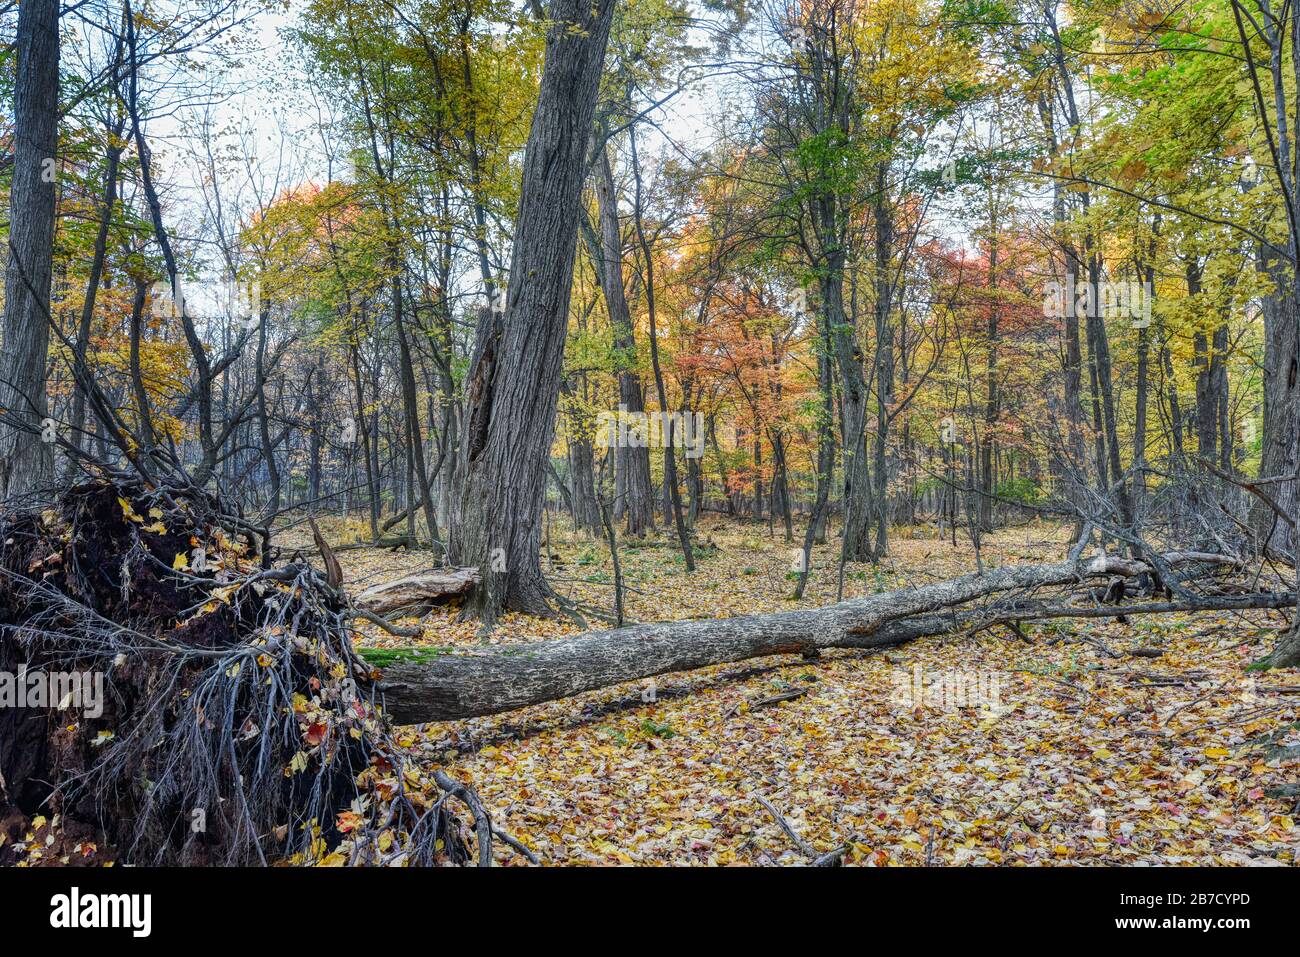 An uprooted tree is down on the ground with a curtain of autumn trees in the background. Stock Photo